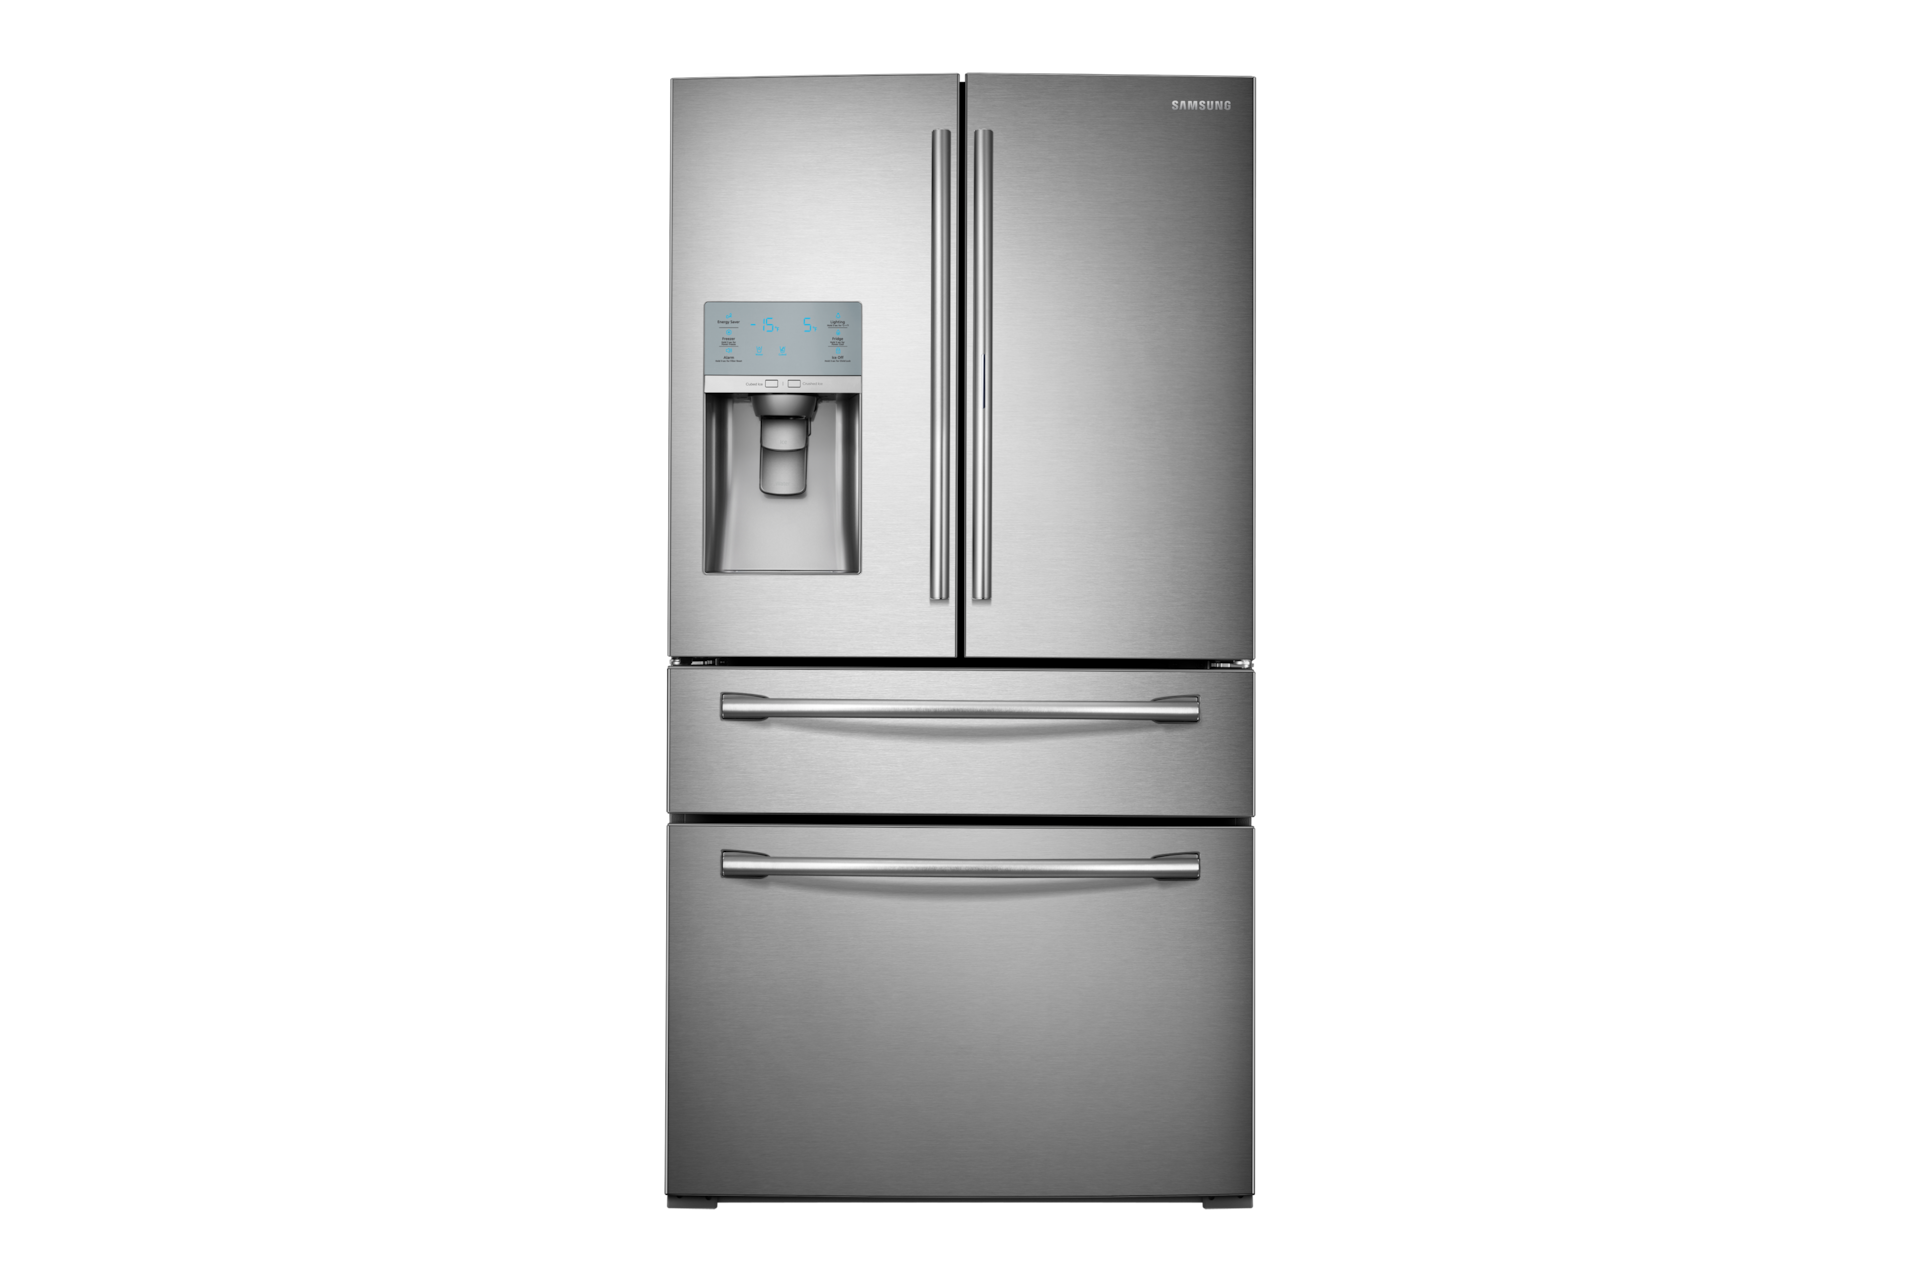 How to turn the door alarm on and off on the refrigerator?